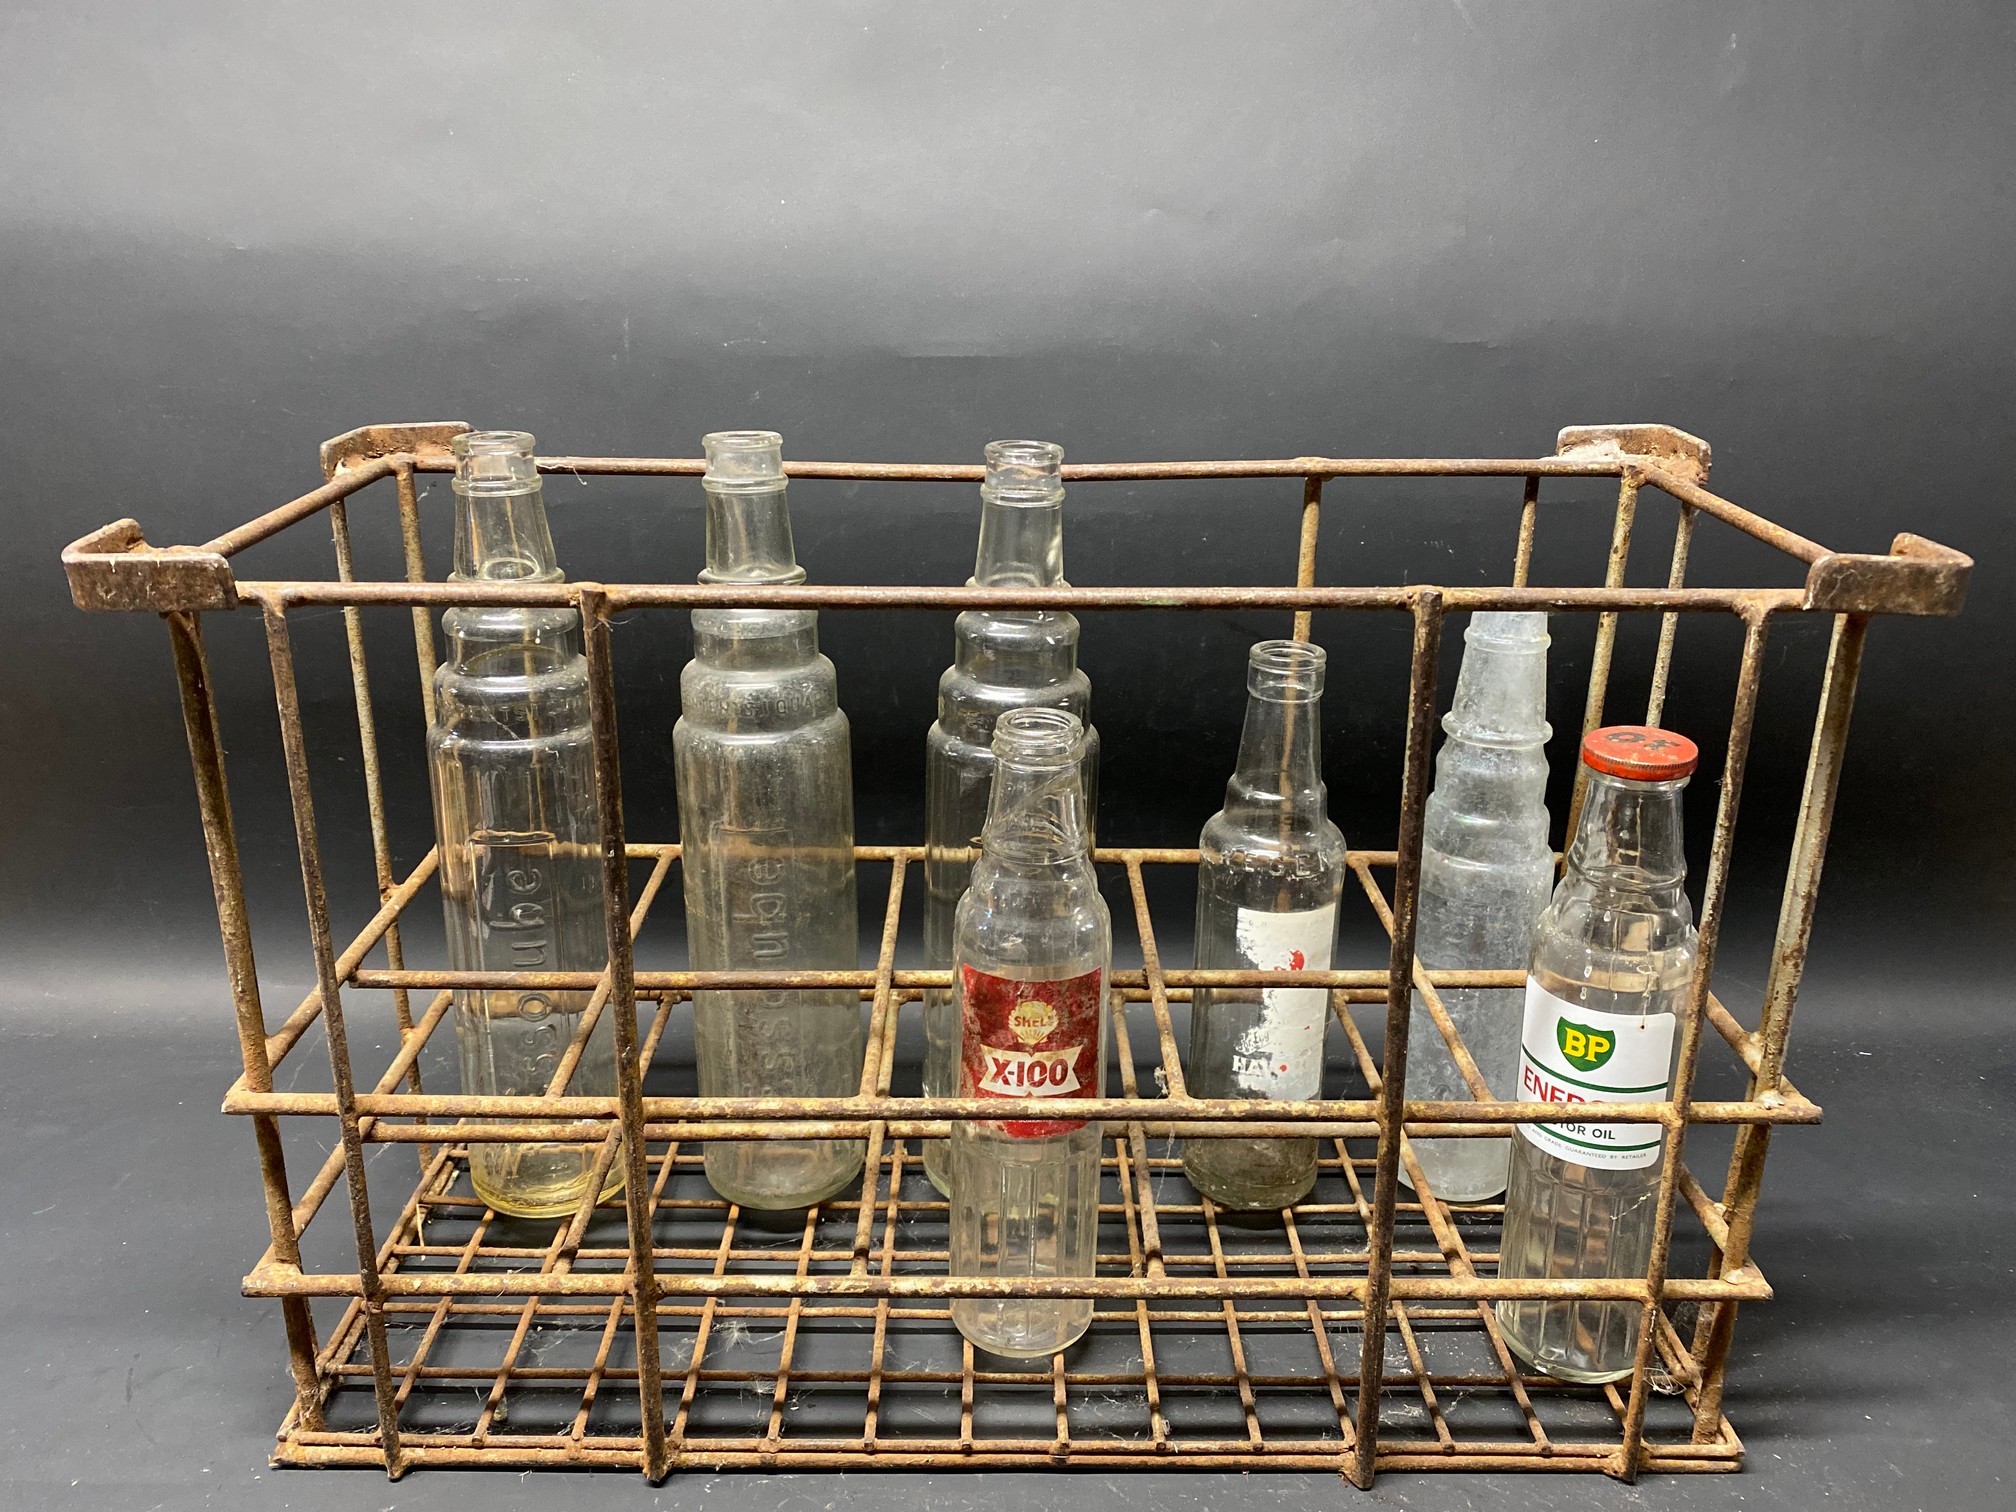 A 10 division oil bottle crate containing an assortment of oil bottles.